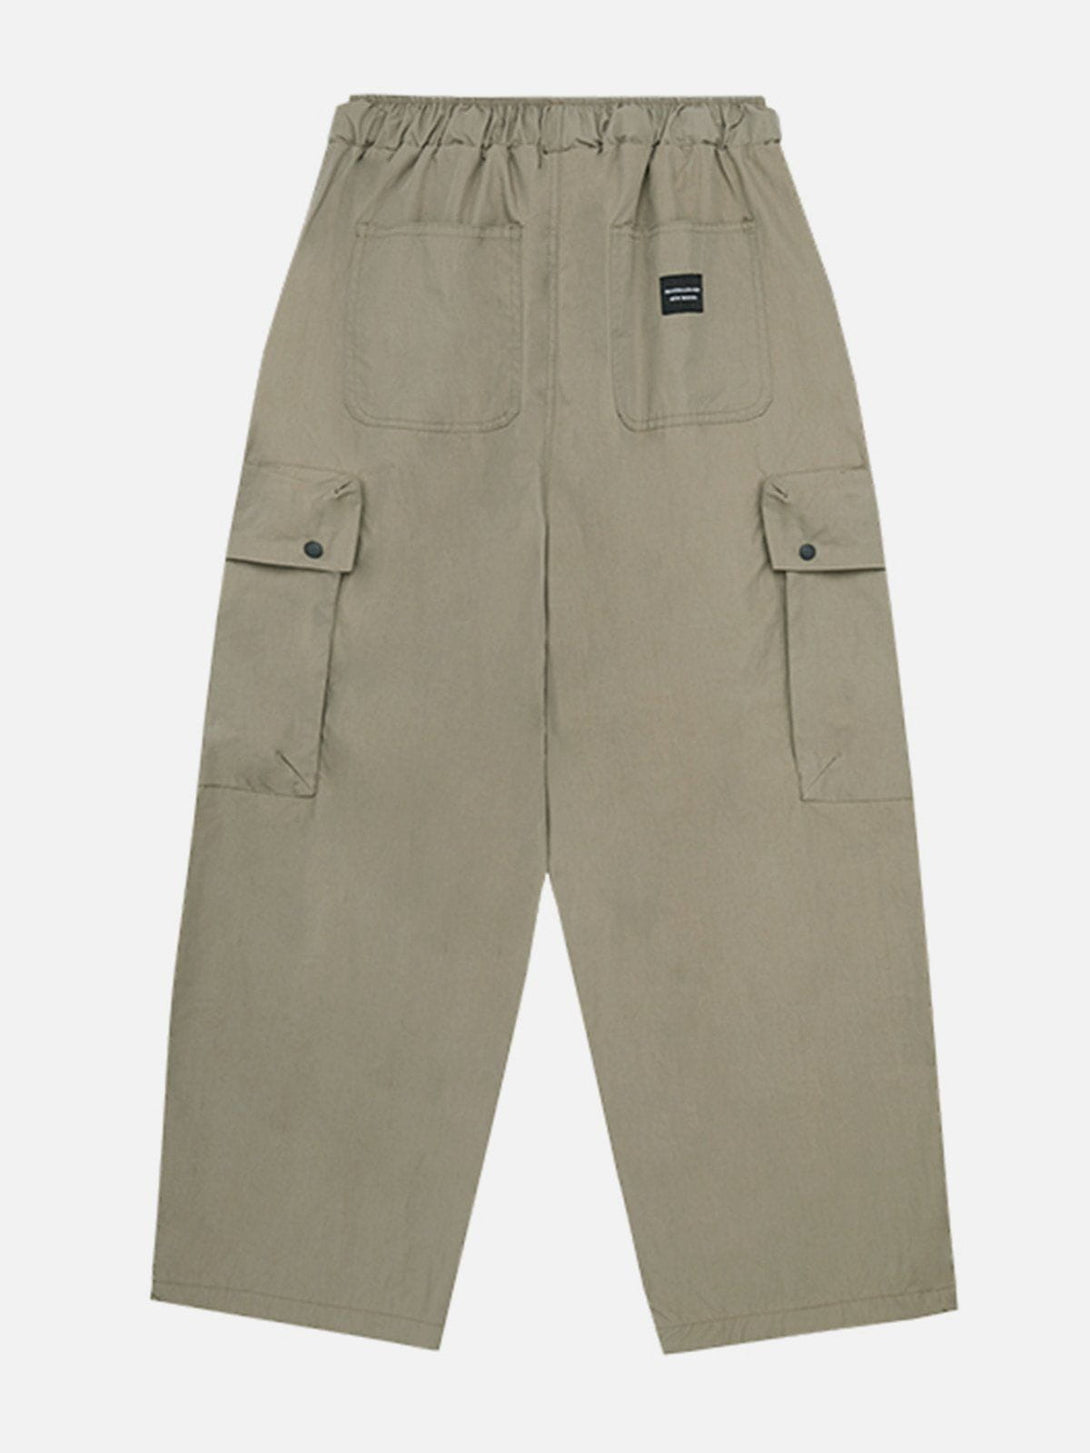 Levefly - Solid Color Functional Cargo Pants - Streetwear Fashion - levefly.com